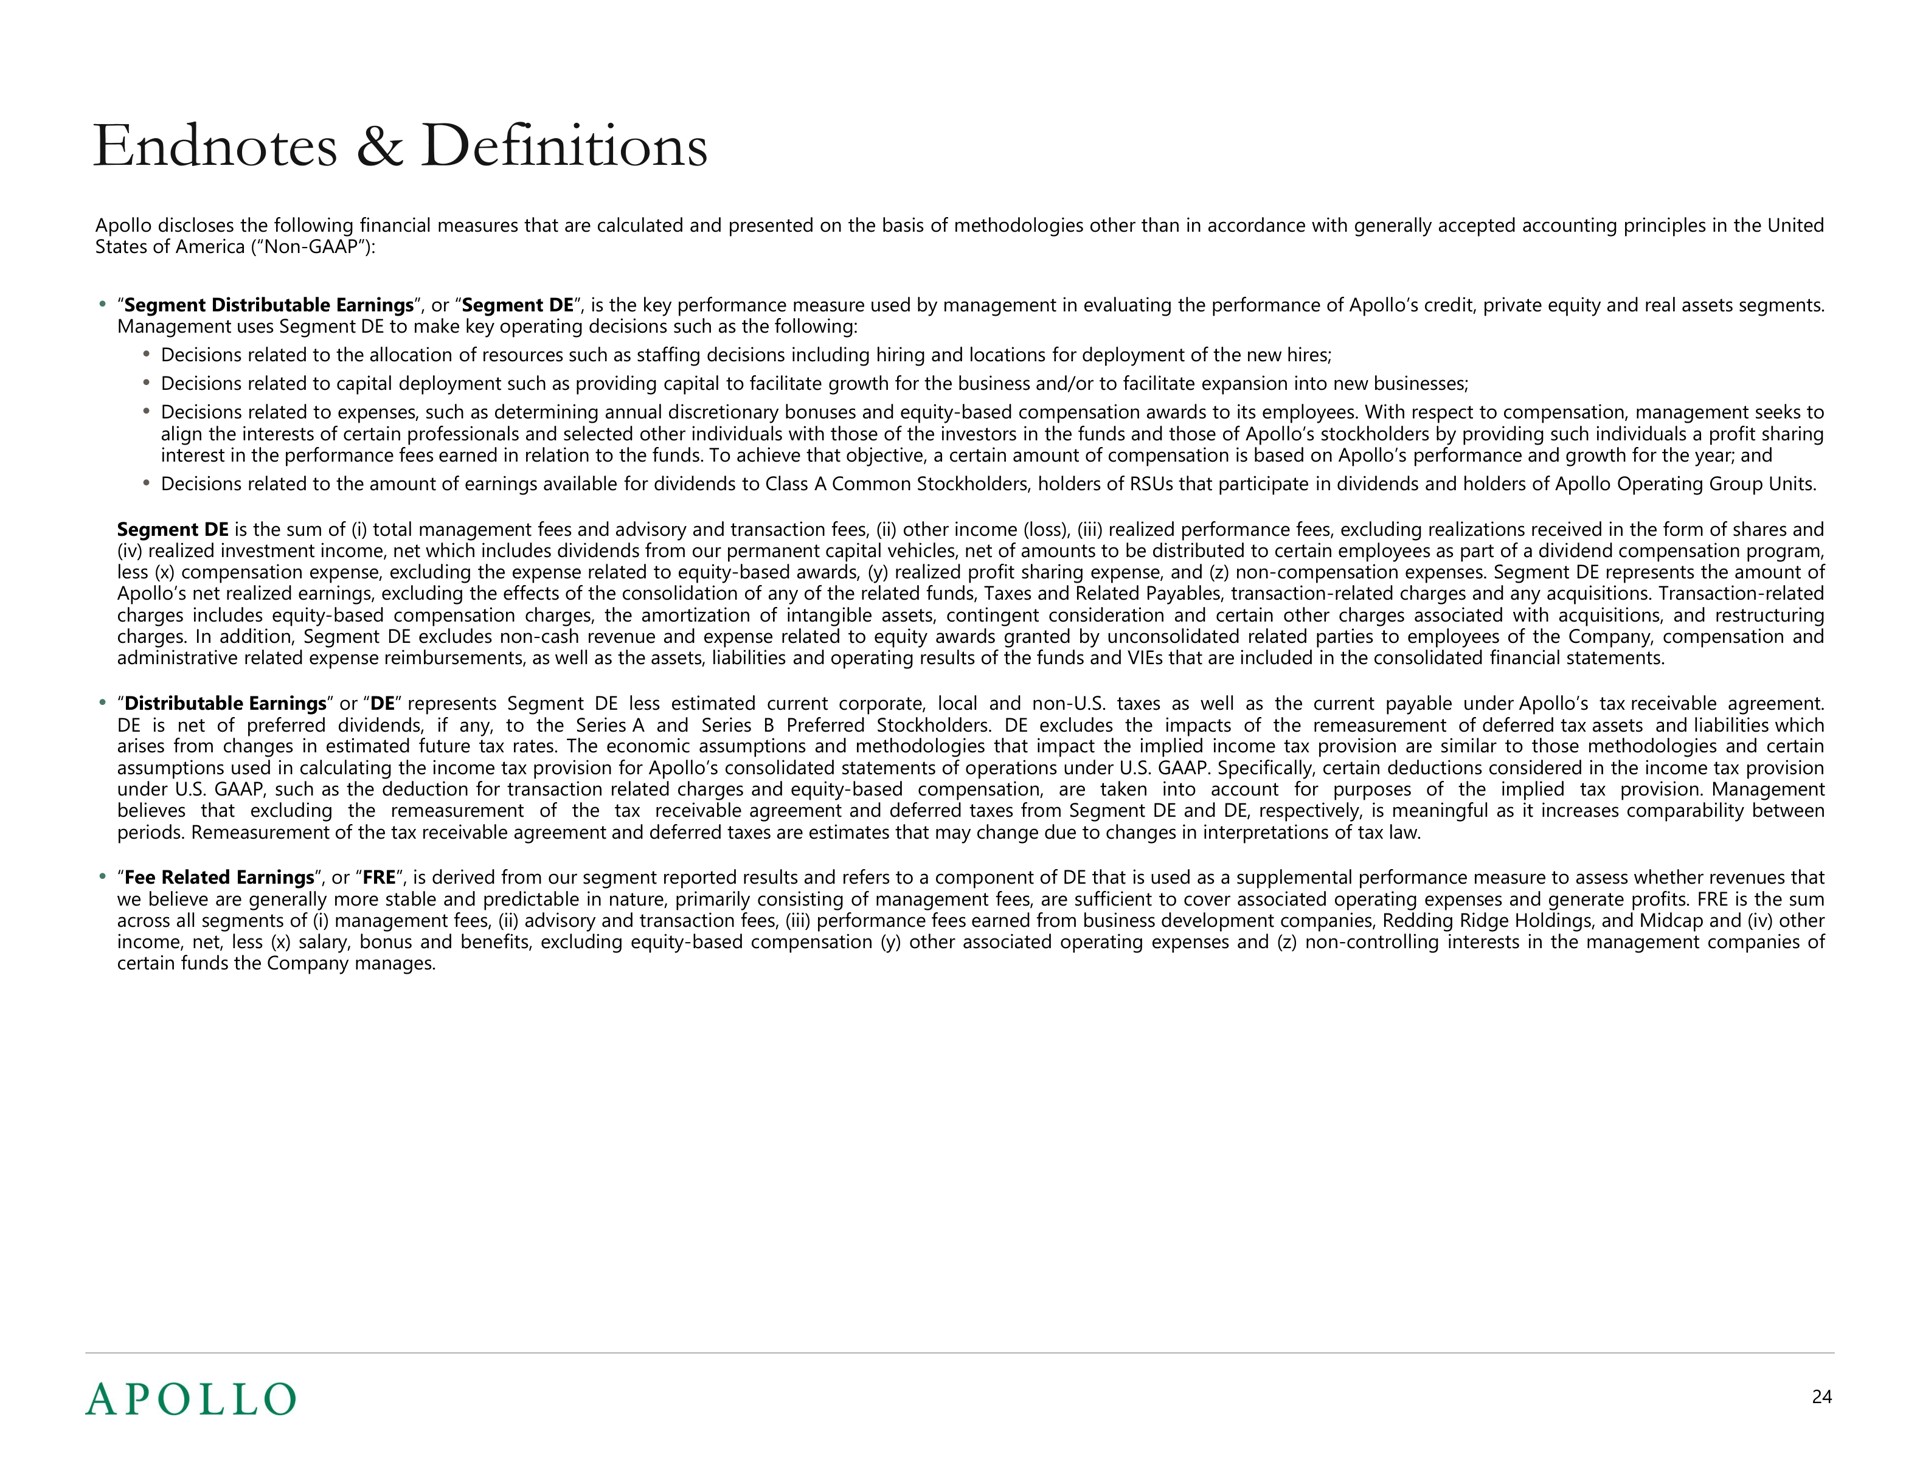 definitions | Apollo Global Management